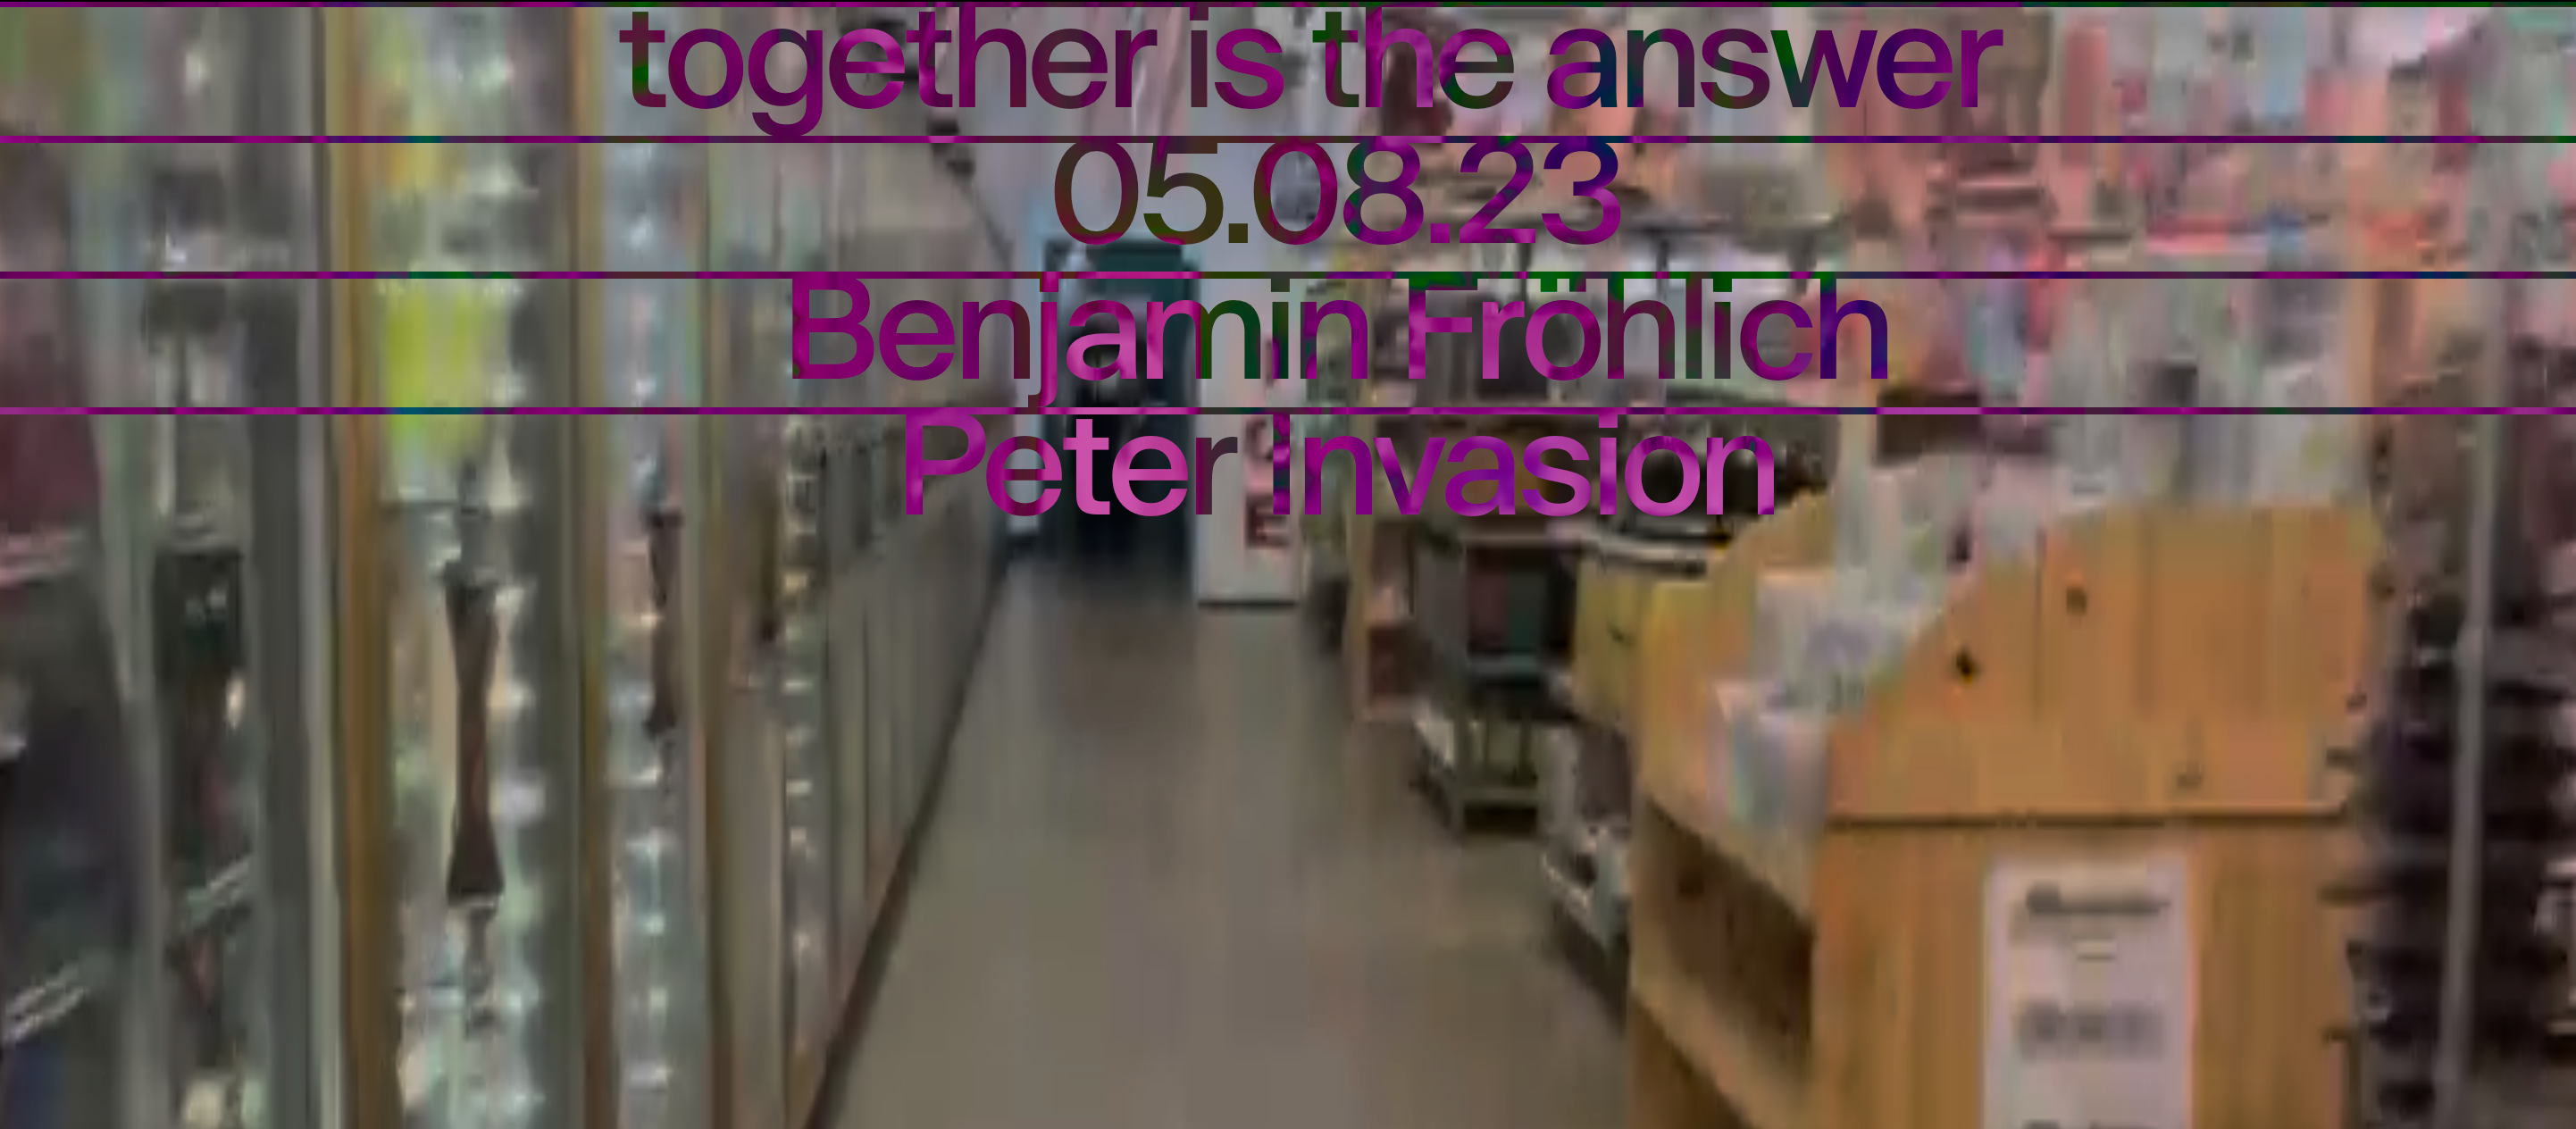 together is the answer - フライヤー表